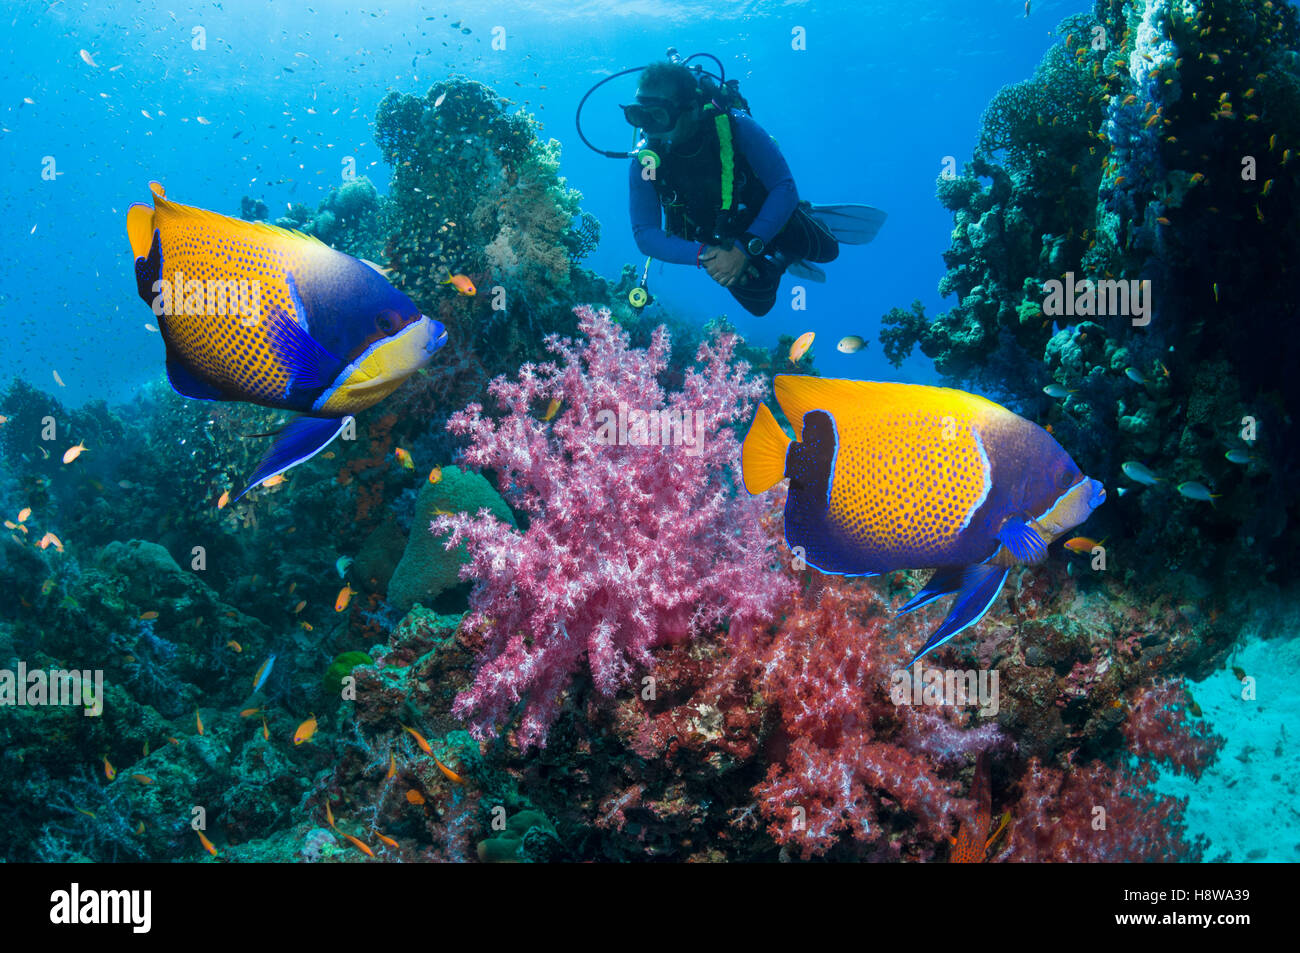 Coral reef scenery with Blue-girdled angelfish or Majestic angelfish(Pomacanthus navarchus) Stock Photo